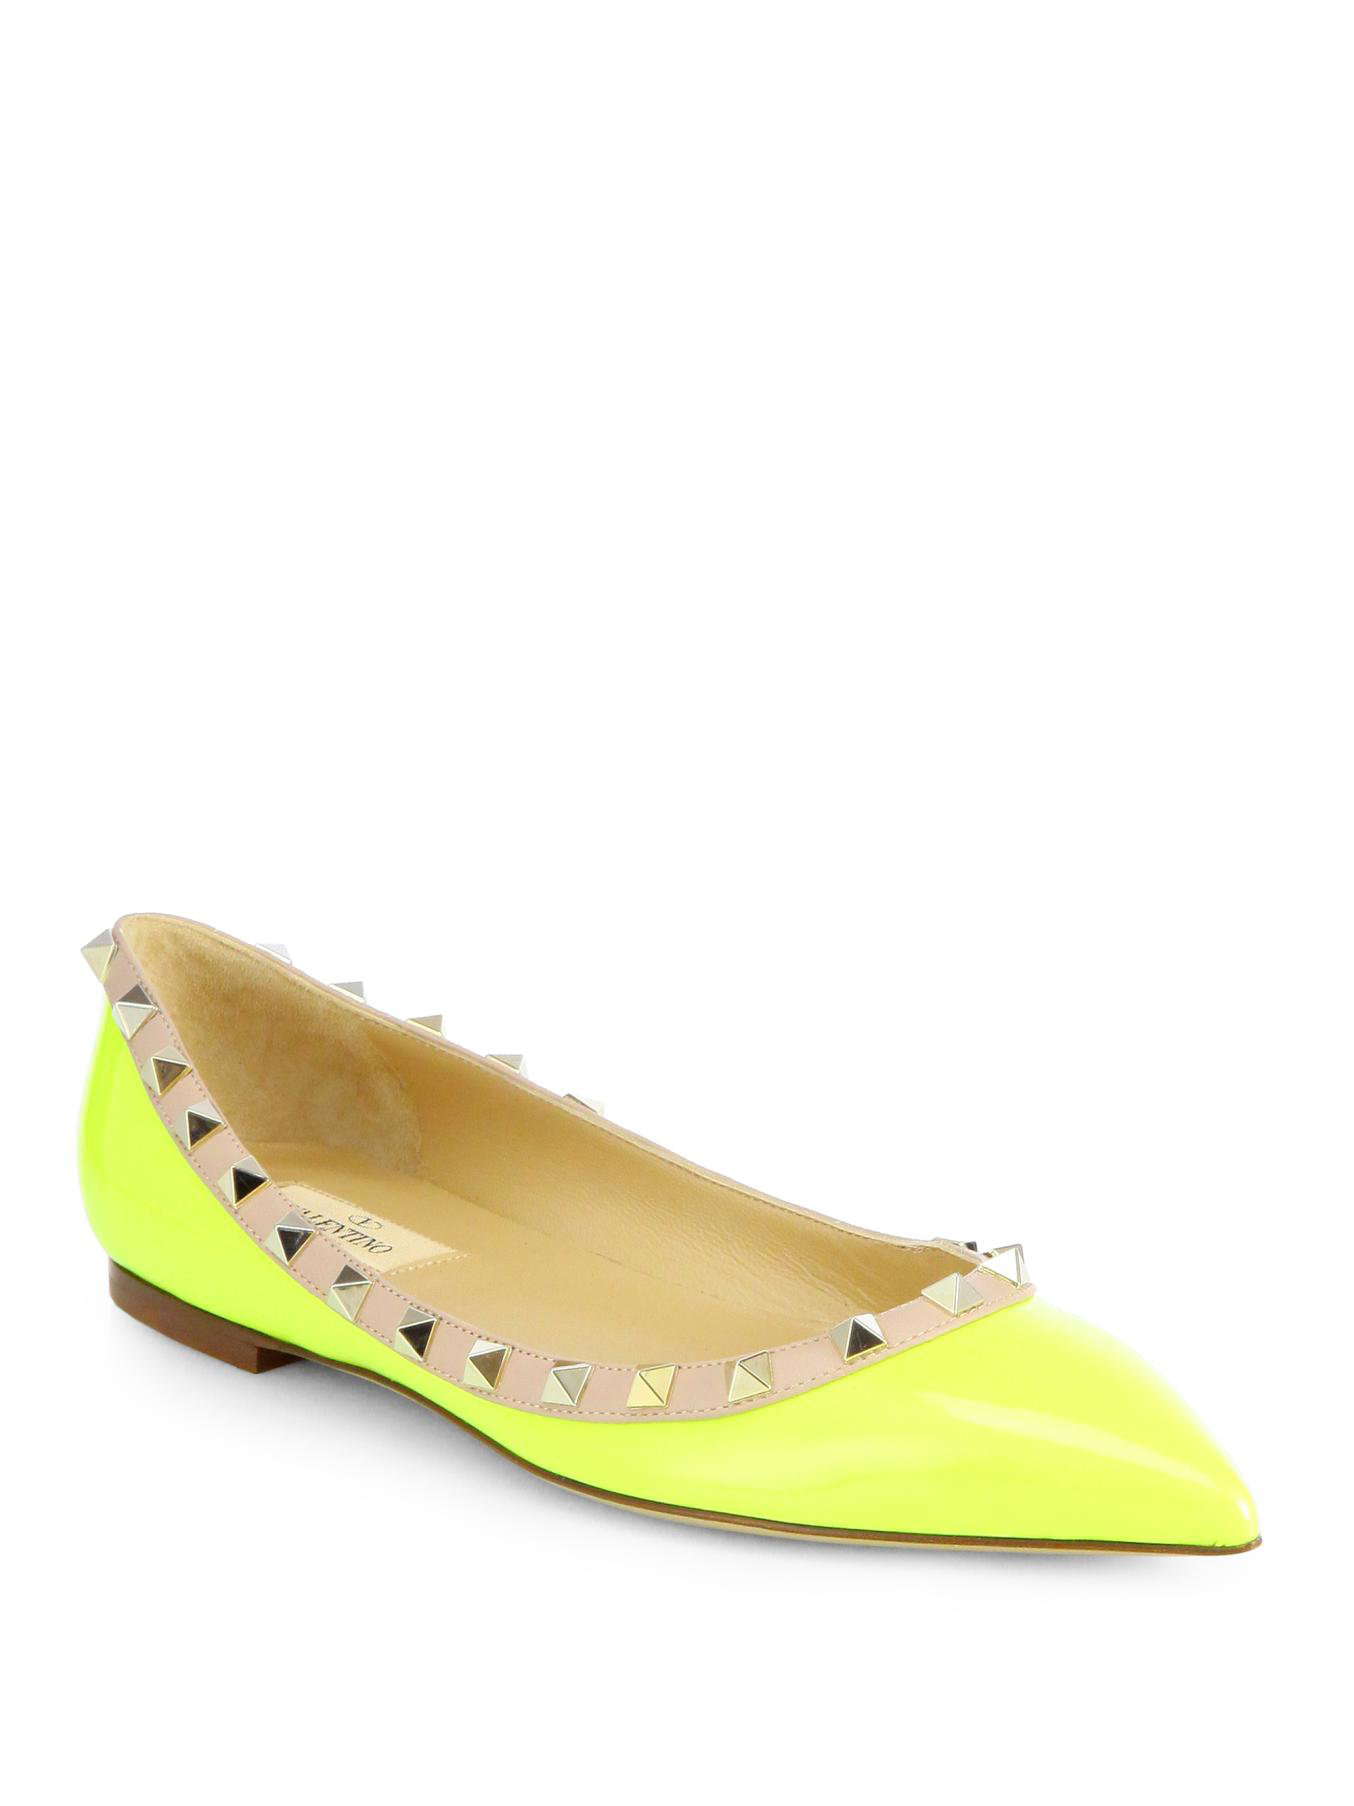 Lyst - Valentino Rockstud Patent Leather Ballet Flats in Yellow